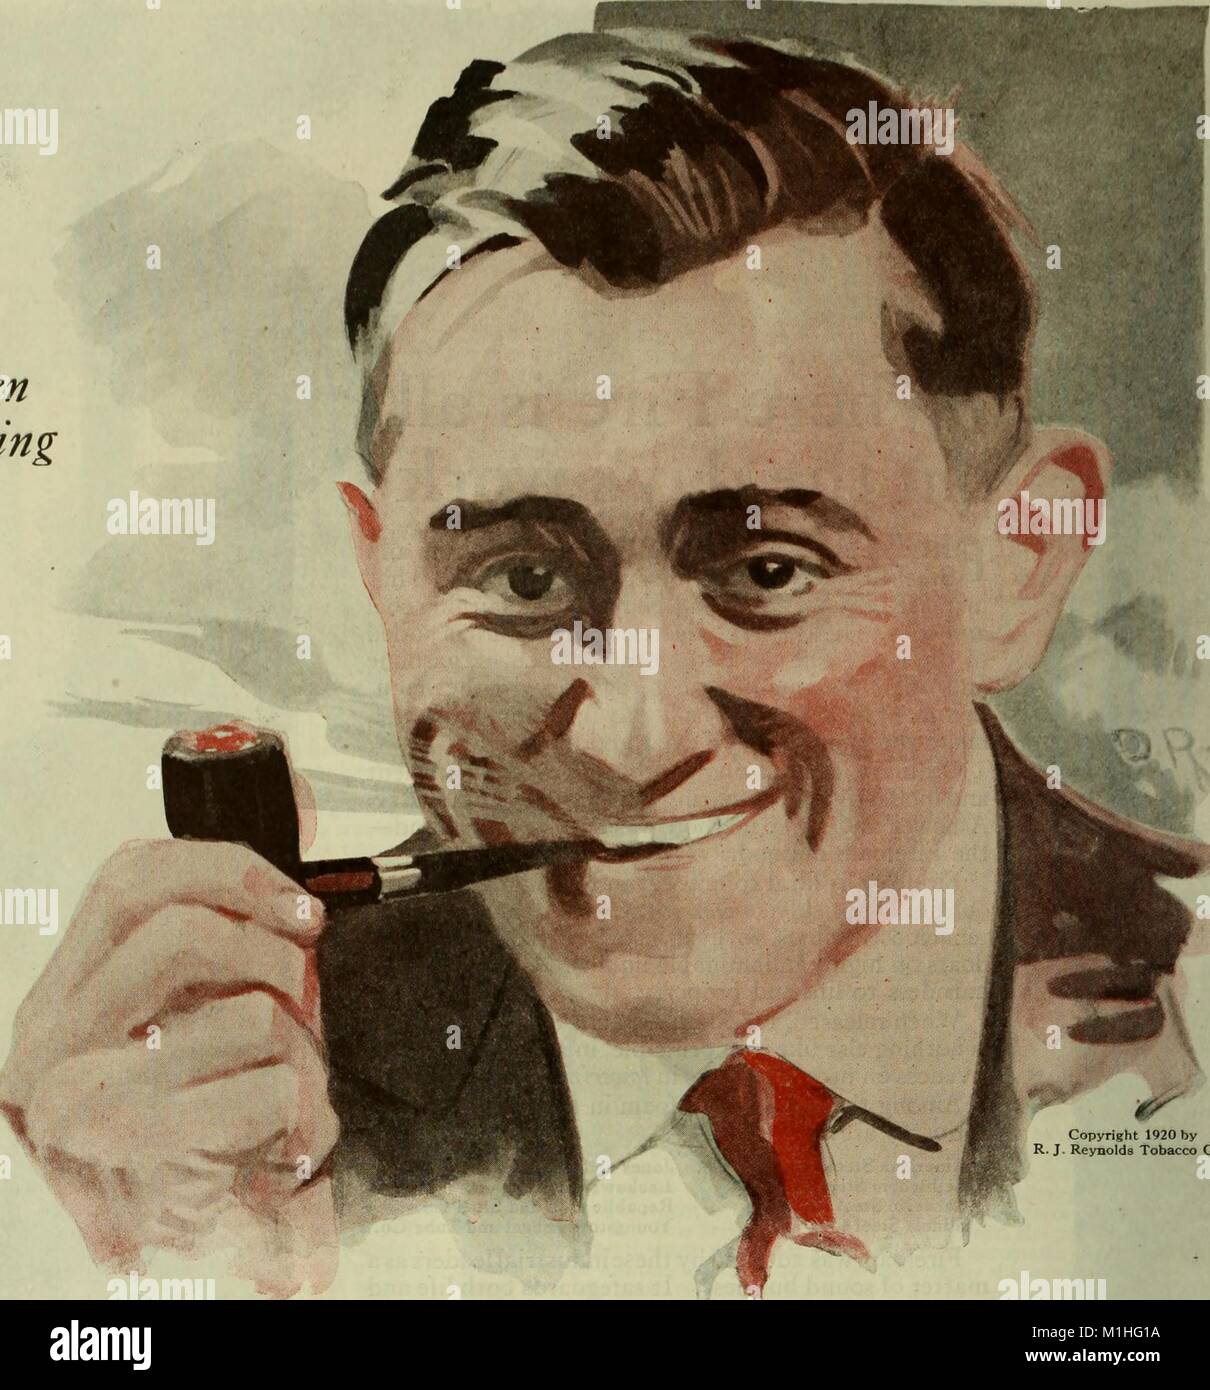 Color illustration advertising RJ Reynold's Tobacco Company brand product, Prince Albert Pipe Tobacco, showing a headshot of a man wearing a suit and tie and smiling while smoking from a pipe held between one hand and his mouth, from page 116 of a 1920s issue of 'The Saturday Evening Post', November 16, 1920. Courtesy Internet Archive. () Stock Photo